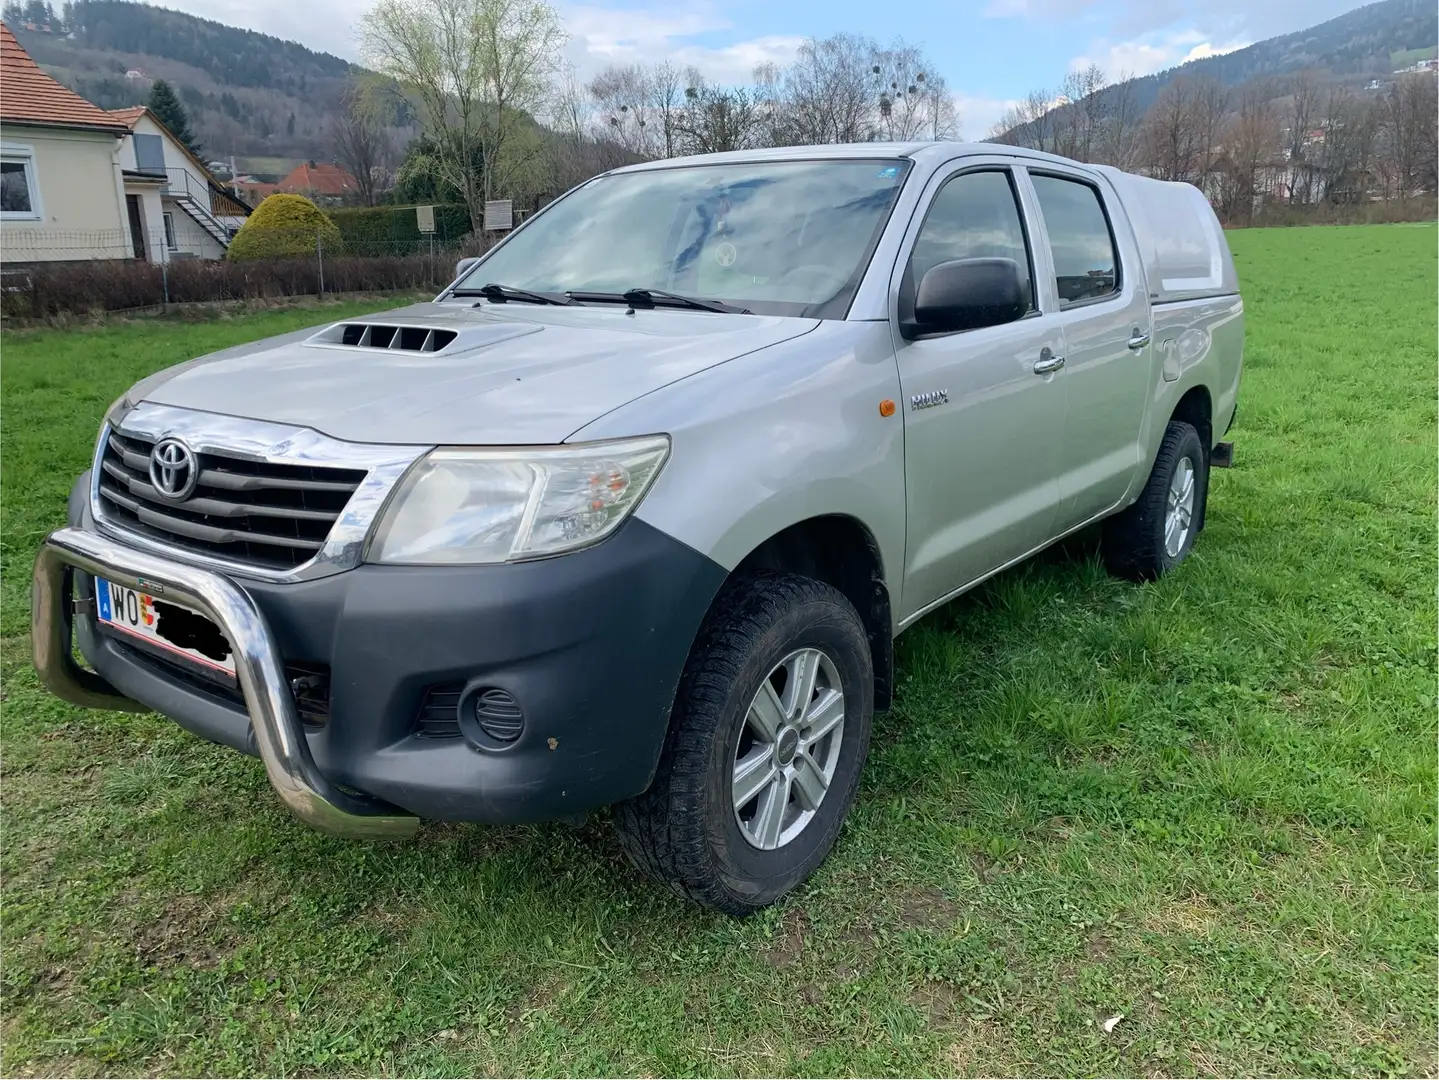 Toyota Hilux 2.5l 4x4 Country Gri - 1